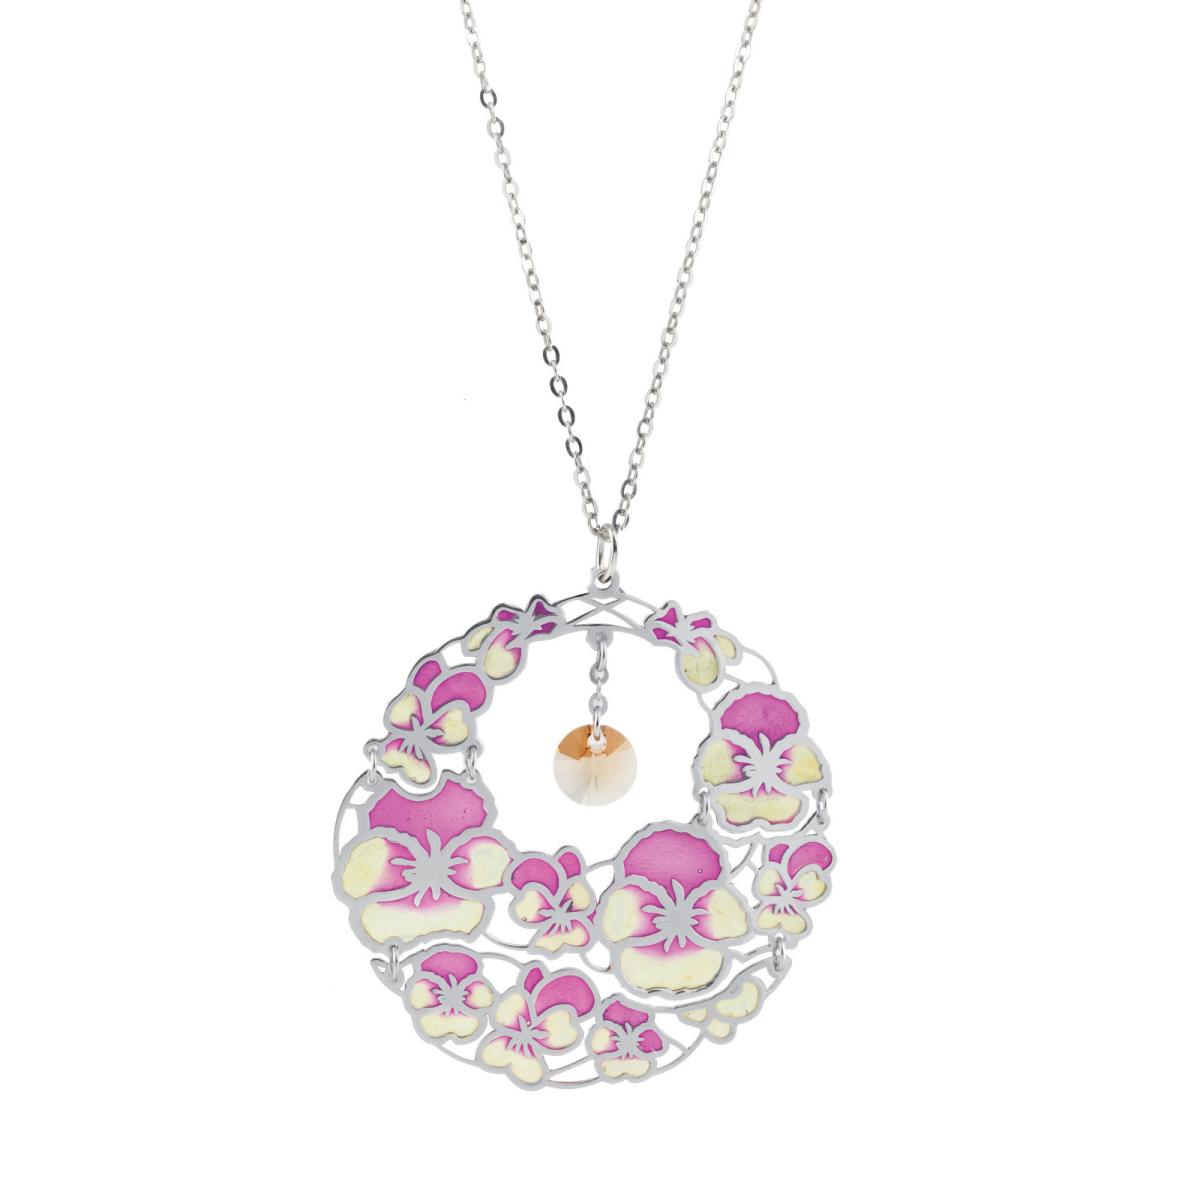 Rhodium-plated silver necklace, with cathedral enamels - ZCL695-MB